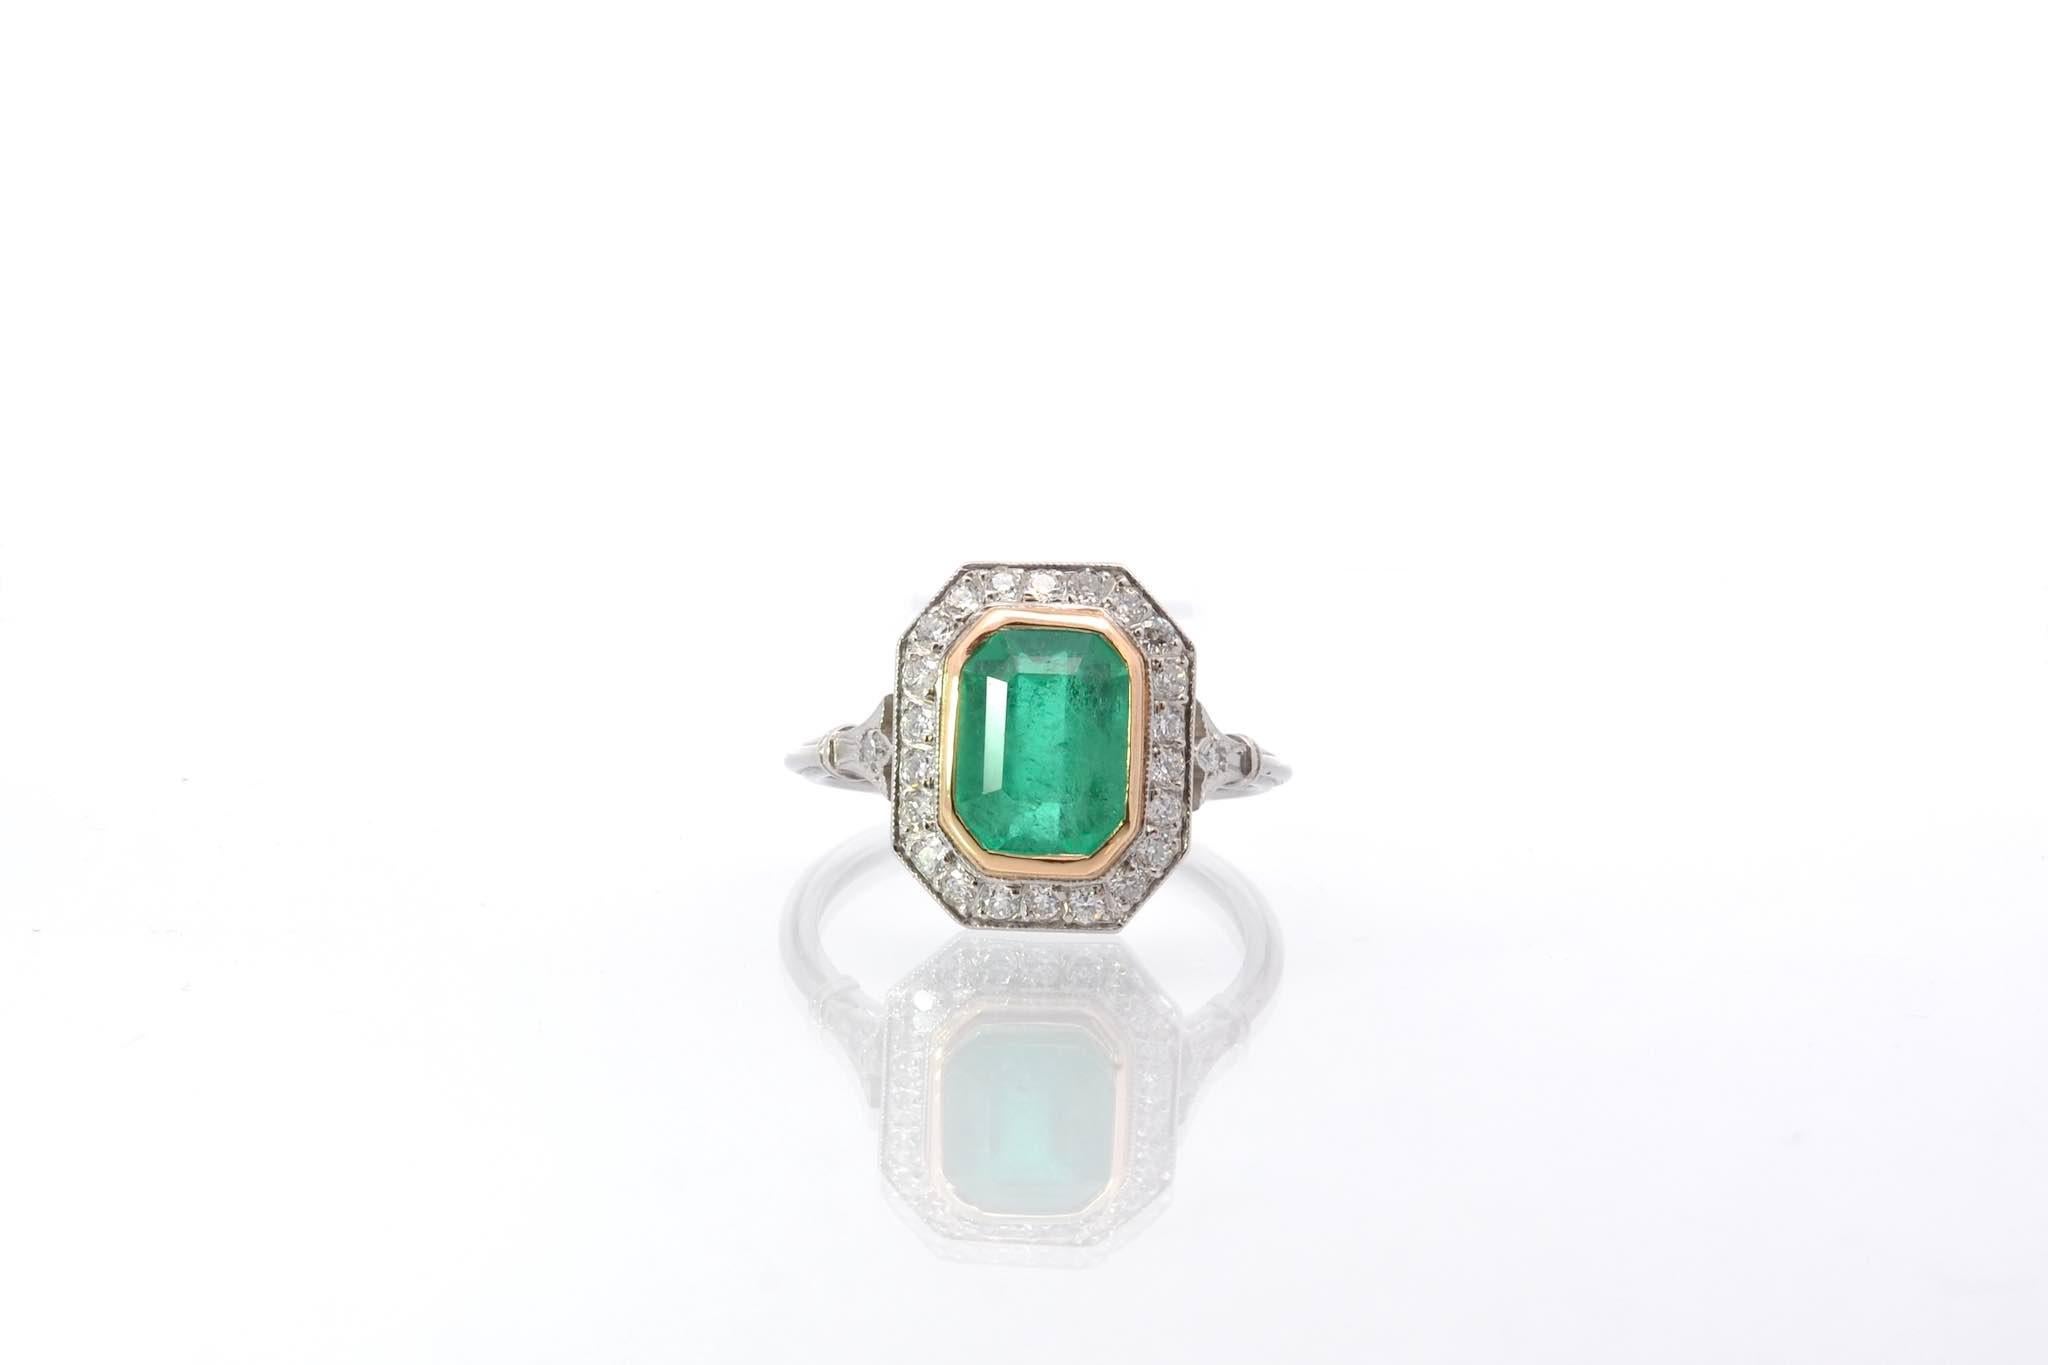 Stones: Emerald of 2.09 cts and 22 diamonds of 0.60 ct
Material: Platinum and 18k yellow gold
Dimensions: 1.4 x 1.1cm
Weight: 3.7g
Period: Recent vintage art deco style
Size: 53 (free sizing)
Certificate
Ref. : 25535 25166